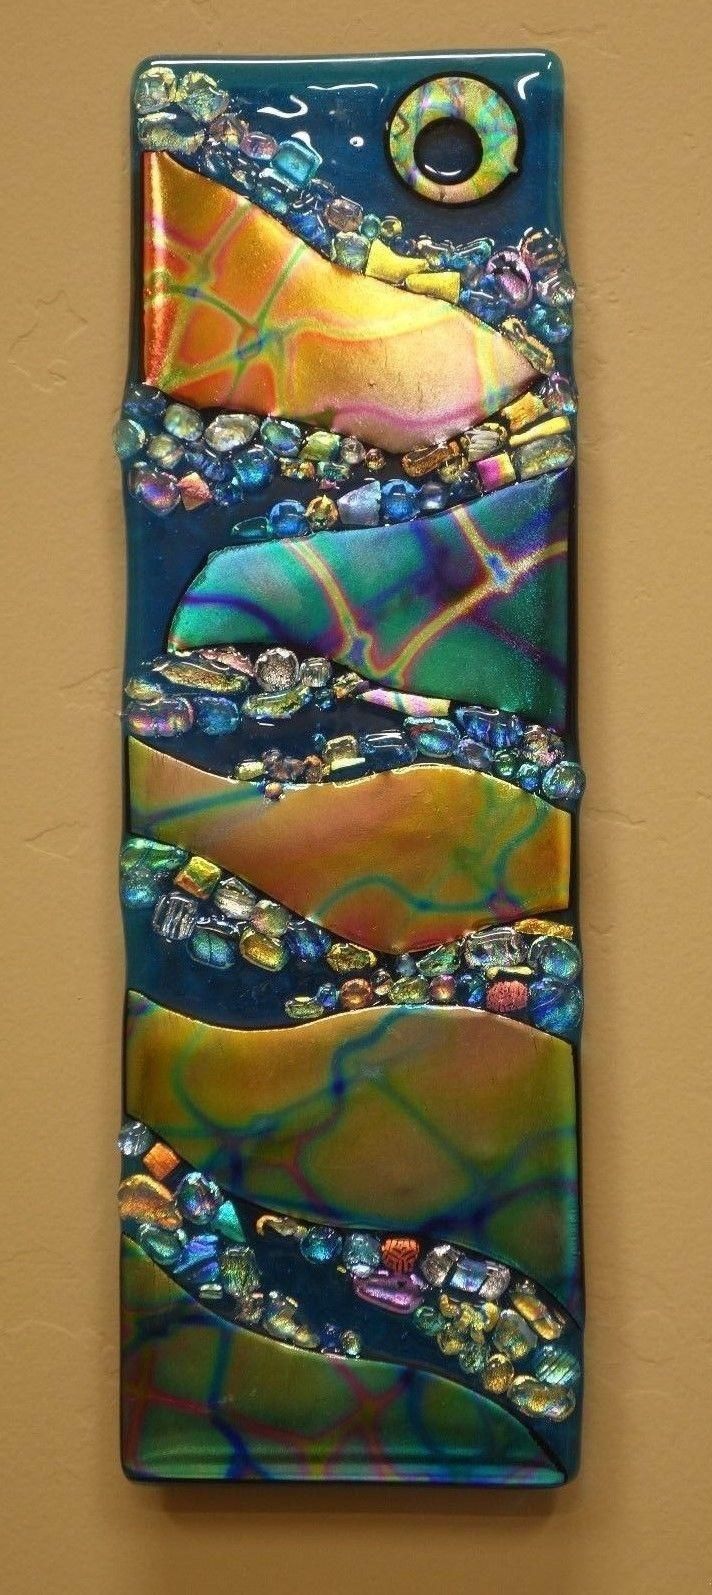 1599 Best Fusing Images On Pinterest | Fused Glass, Glass Art And With Regard To Fused Glass Art For Walls (Photo 11 of 20)